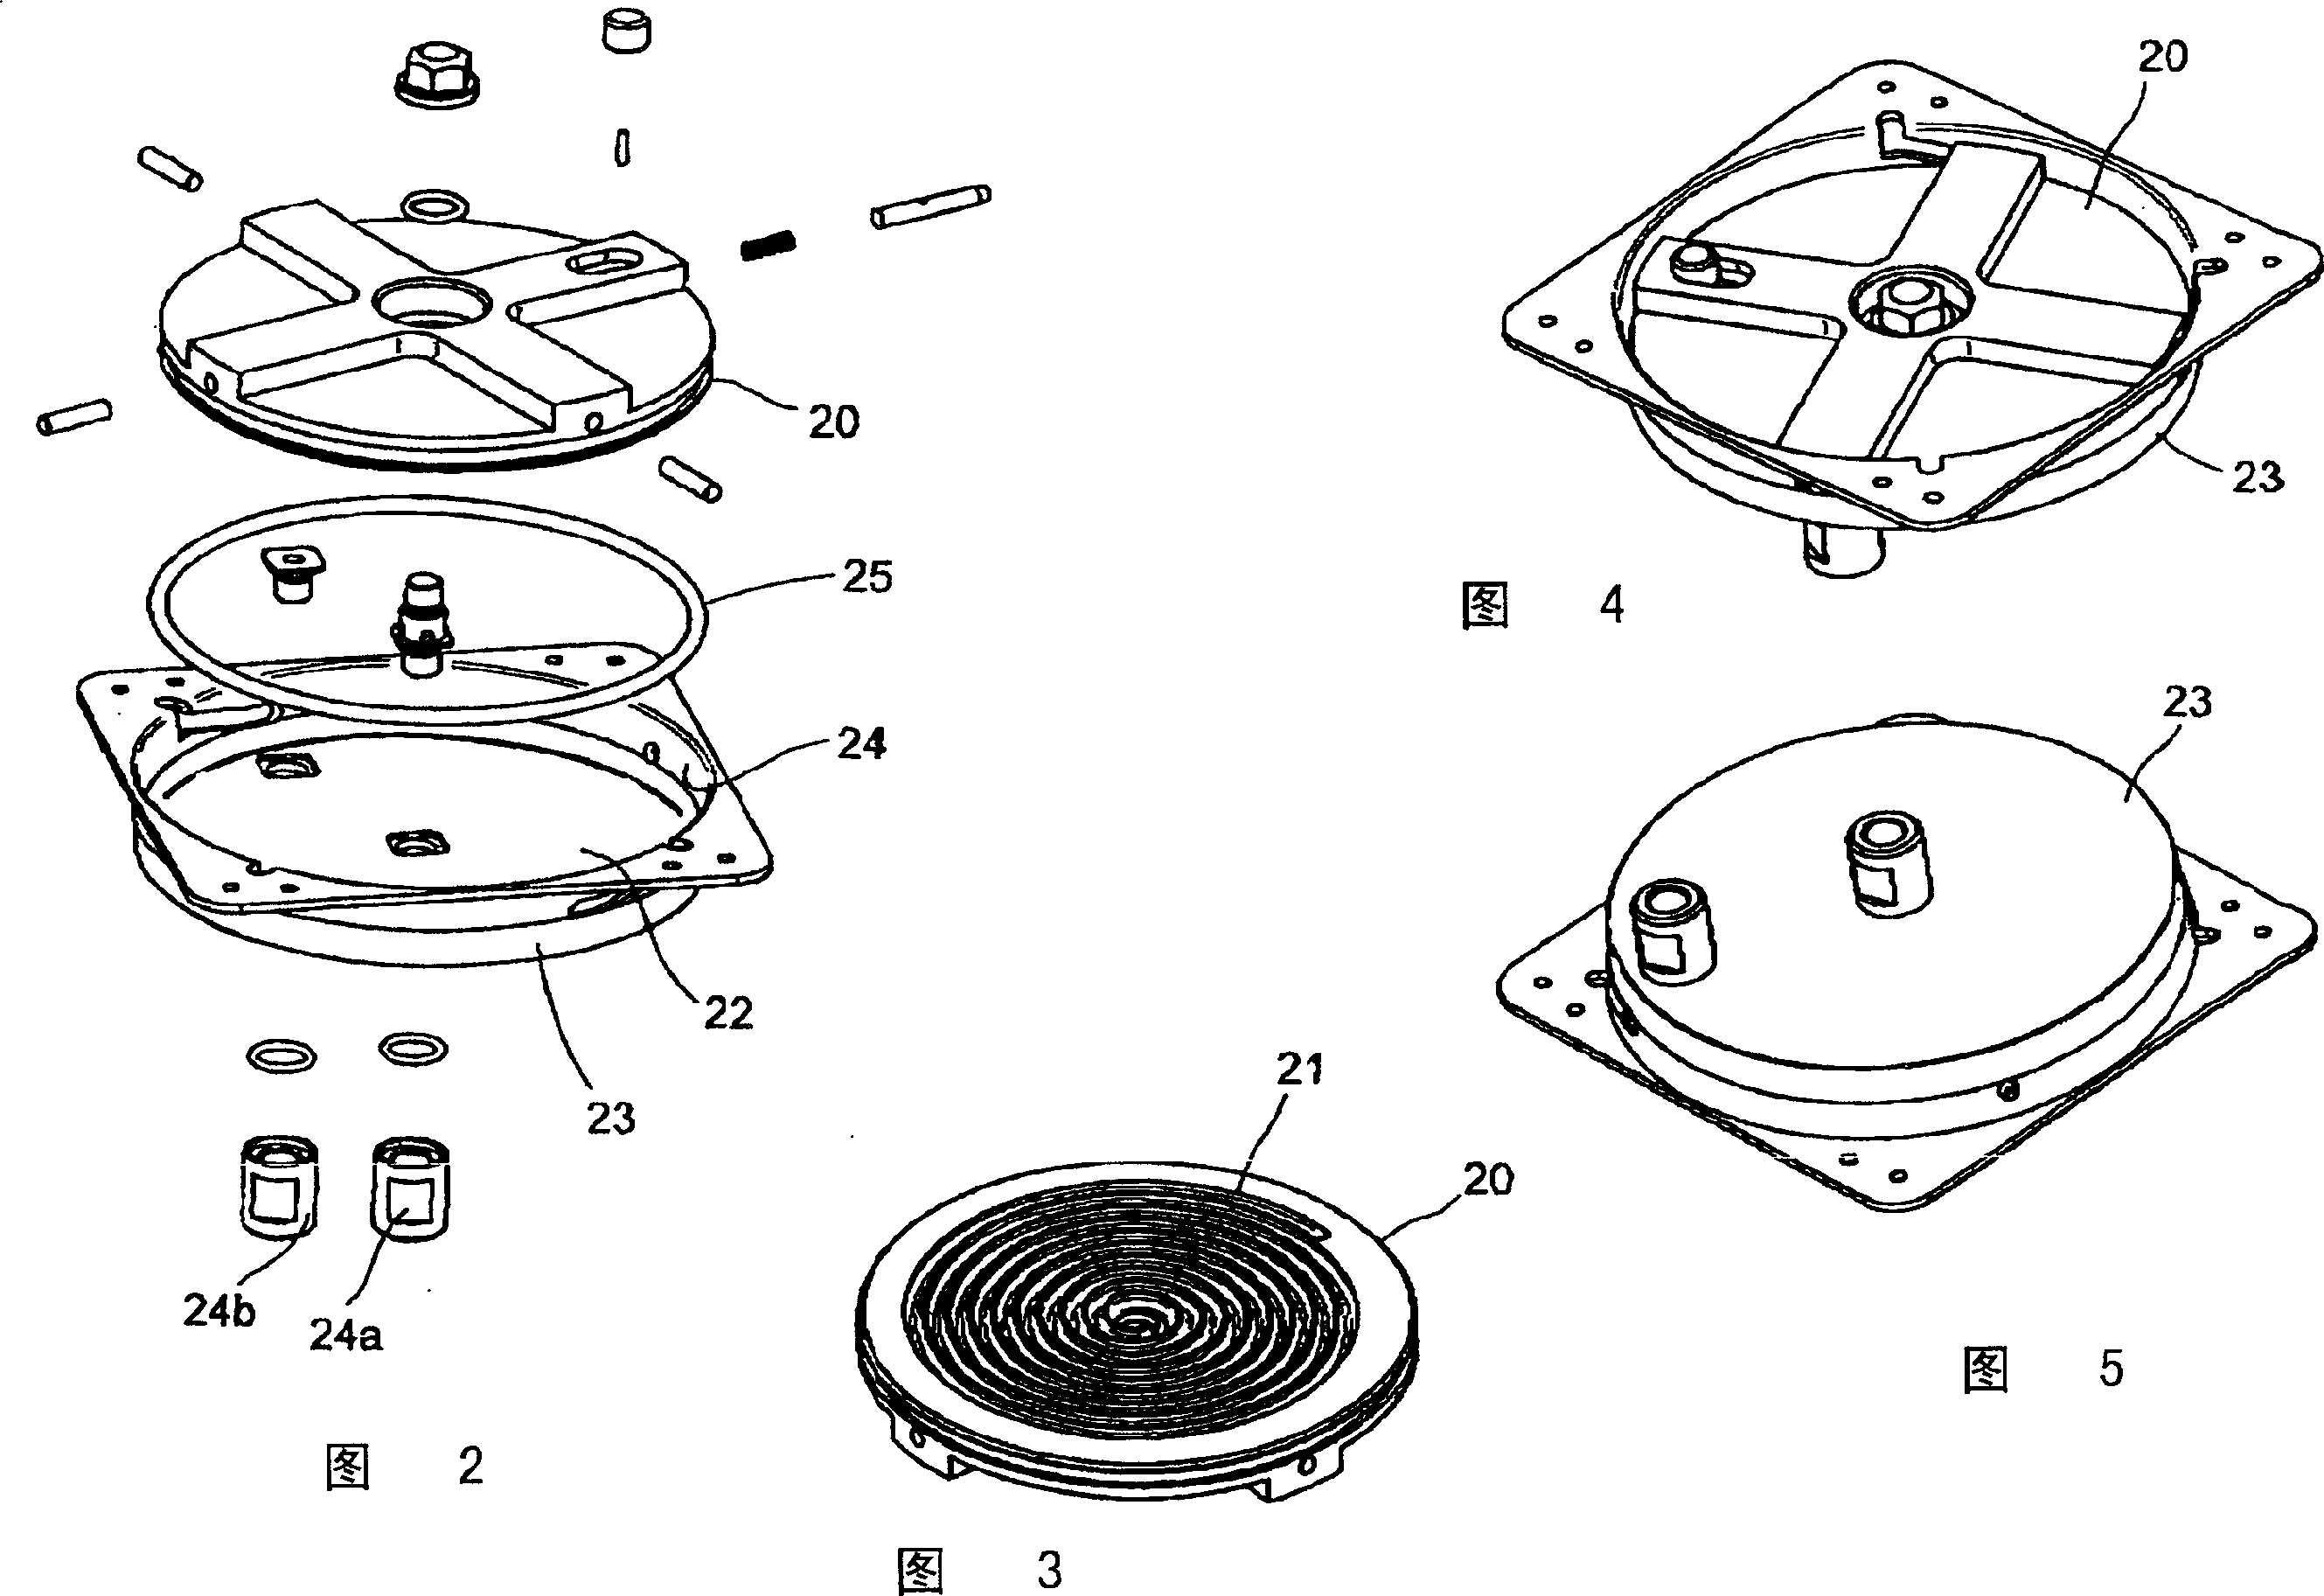 Method and device for producing milk foam or warm milk drinks